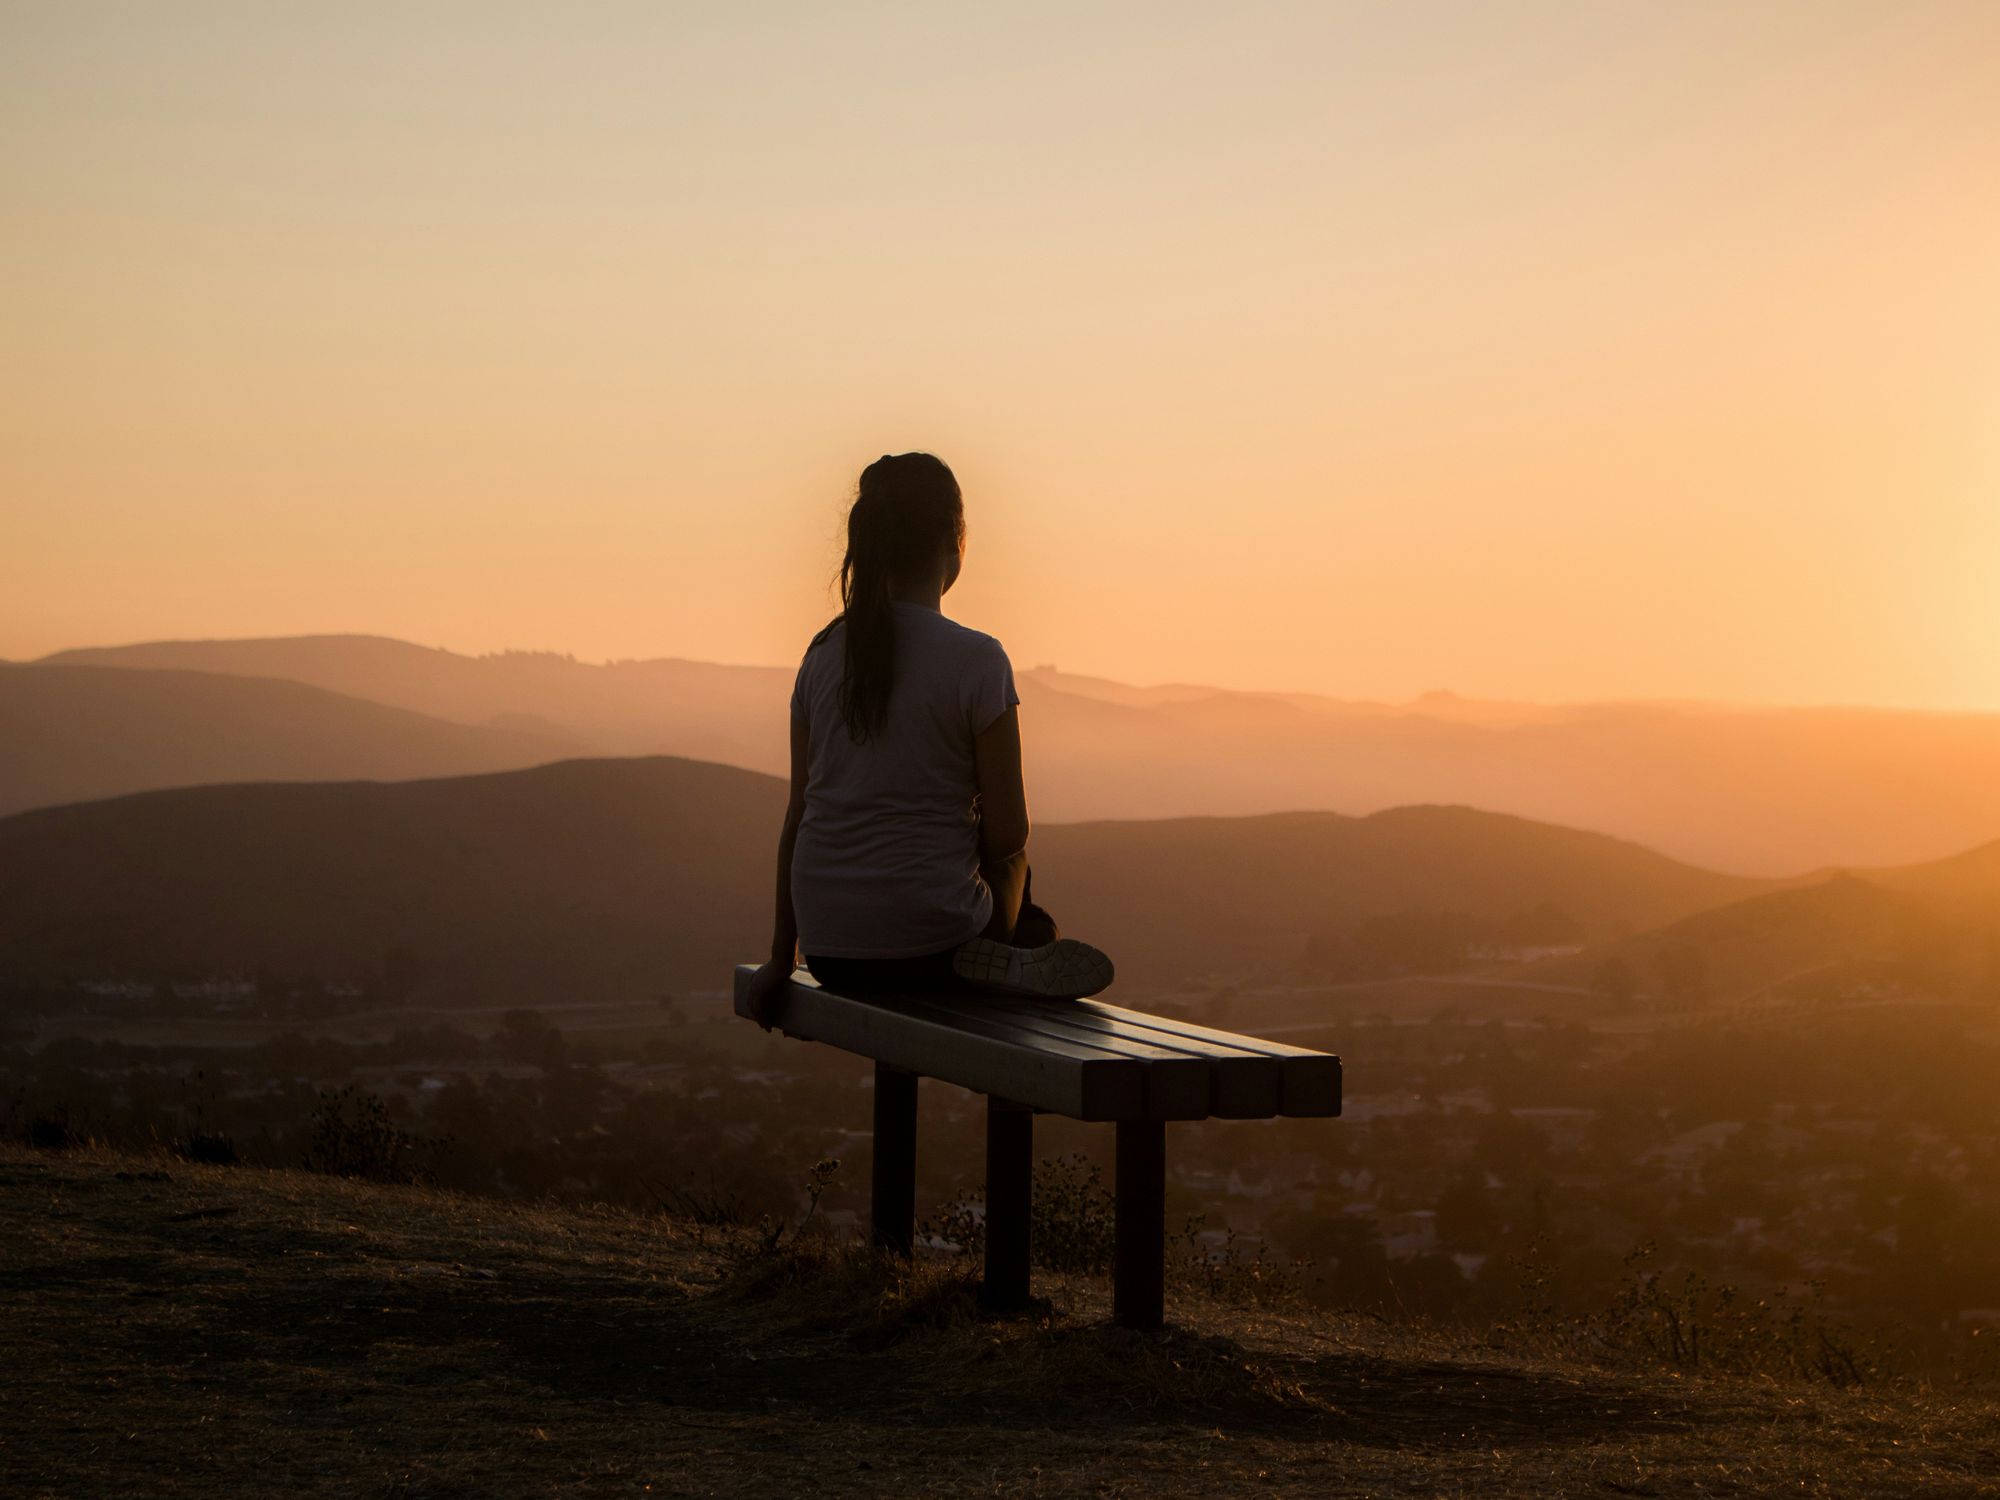 woman sitting on bench over viewing mountain at sunset